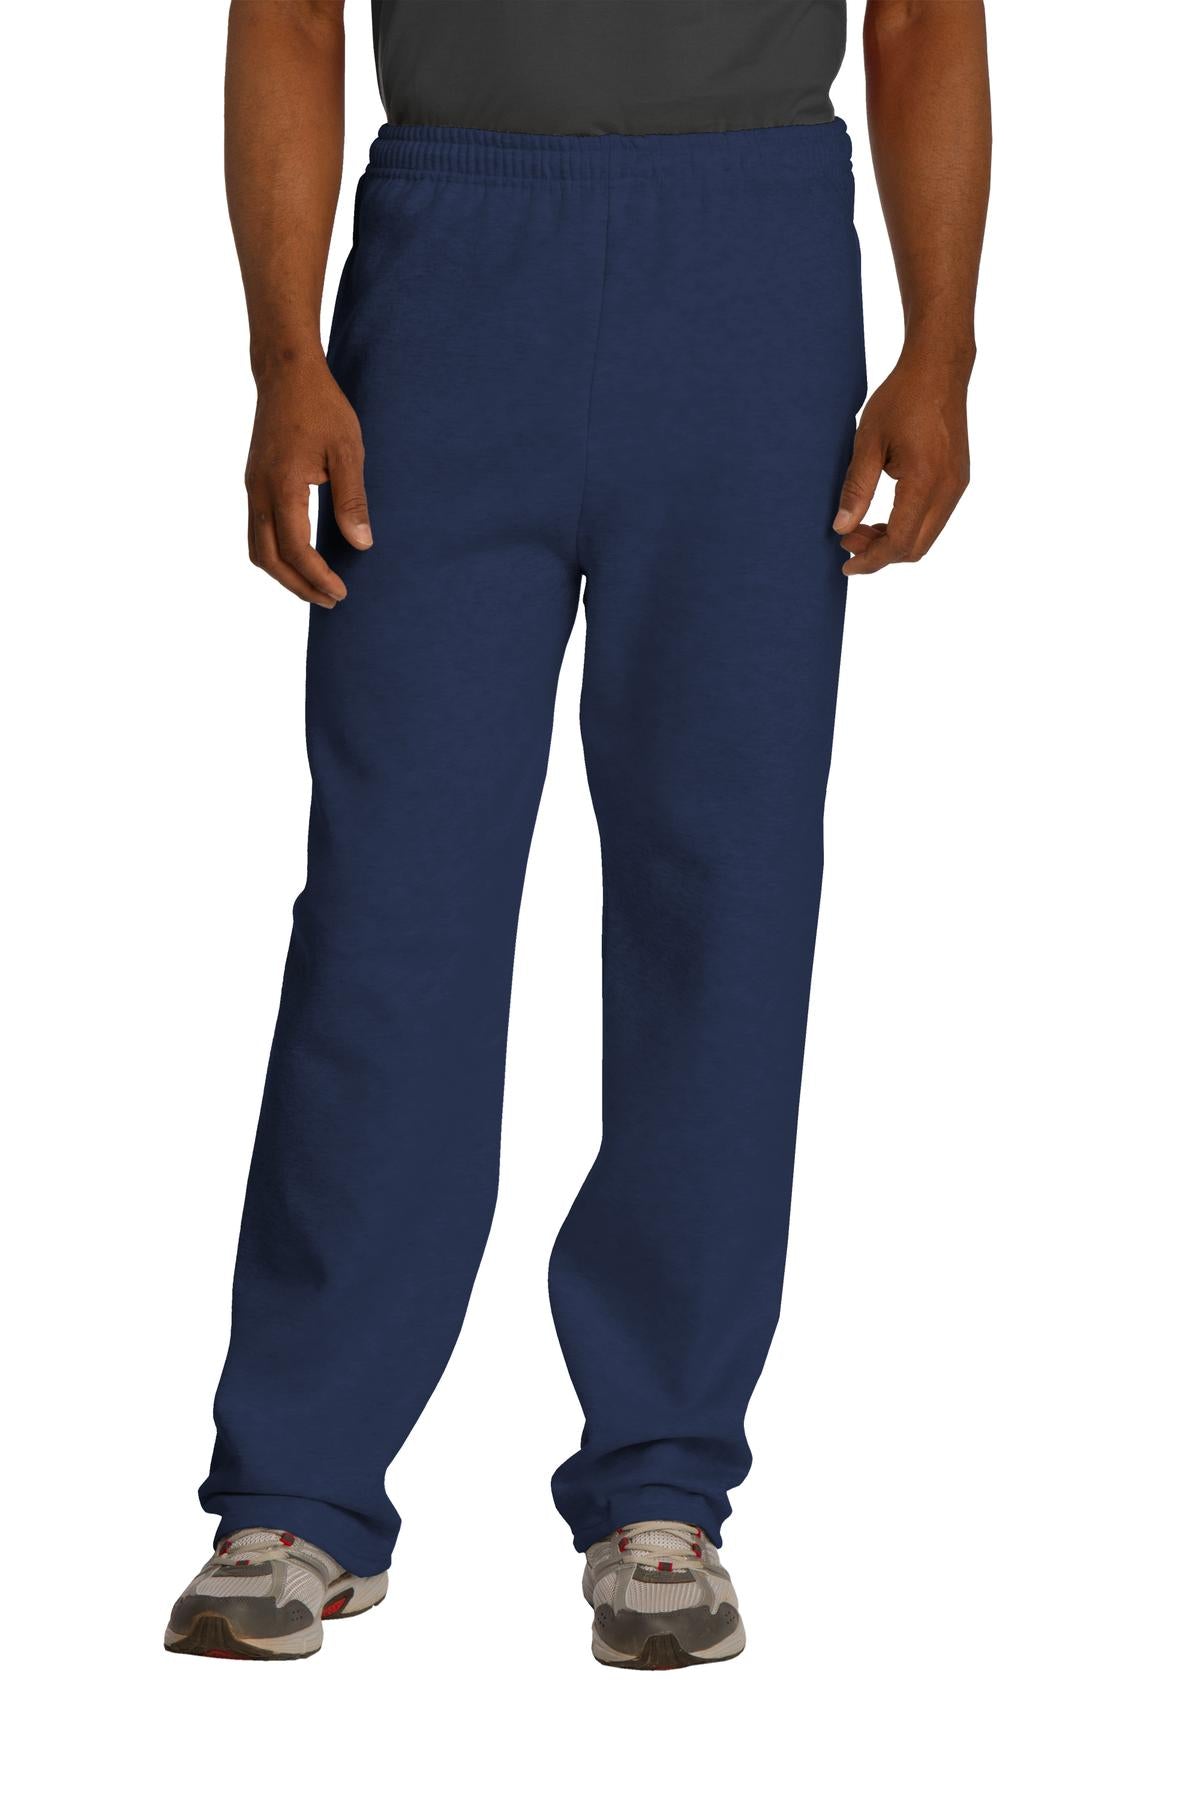 JERZEES® NuBlend® Open Bottom Pant with Pockets. 974MP - DFW Impression